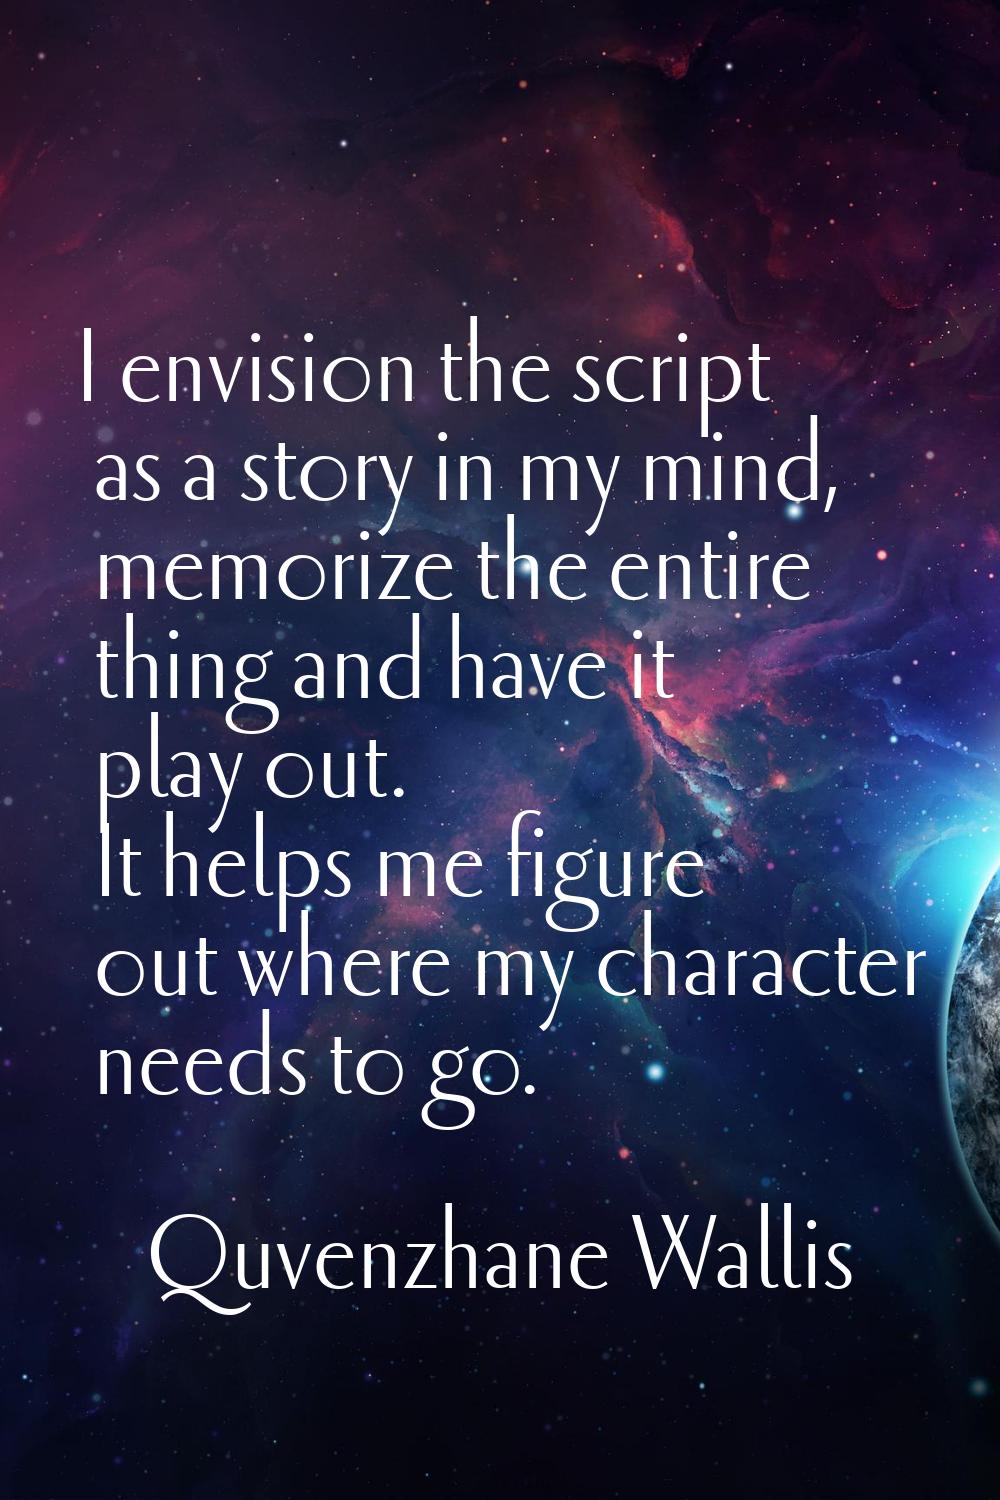 I envision the script as a story in my mind, memorize the entire thing and have it play out. It hel